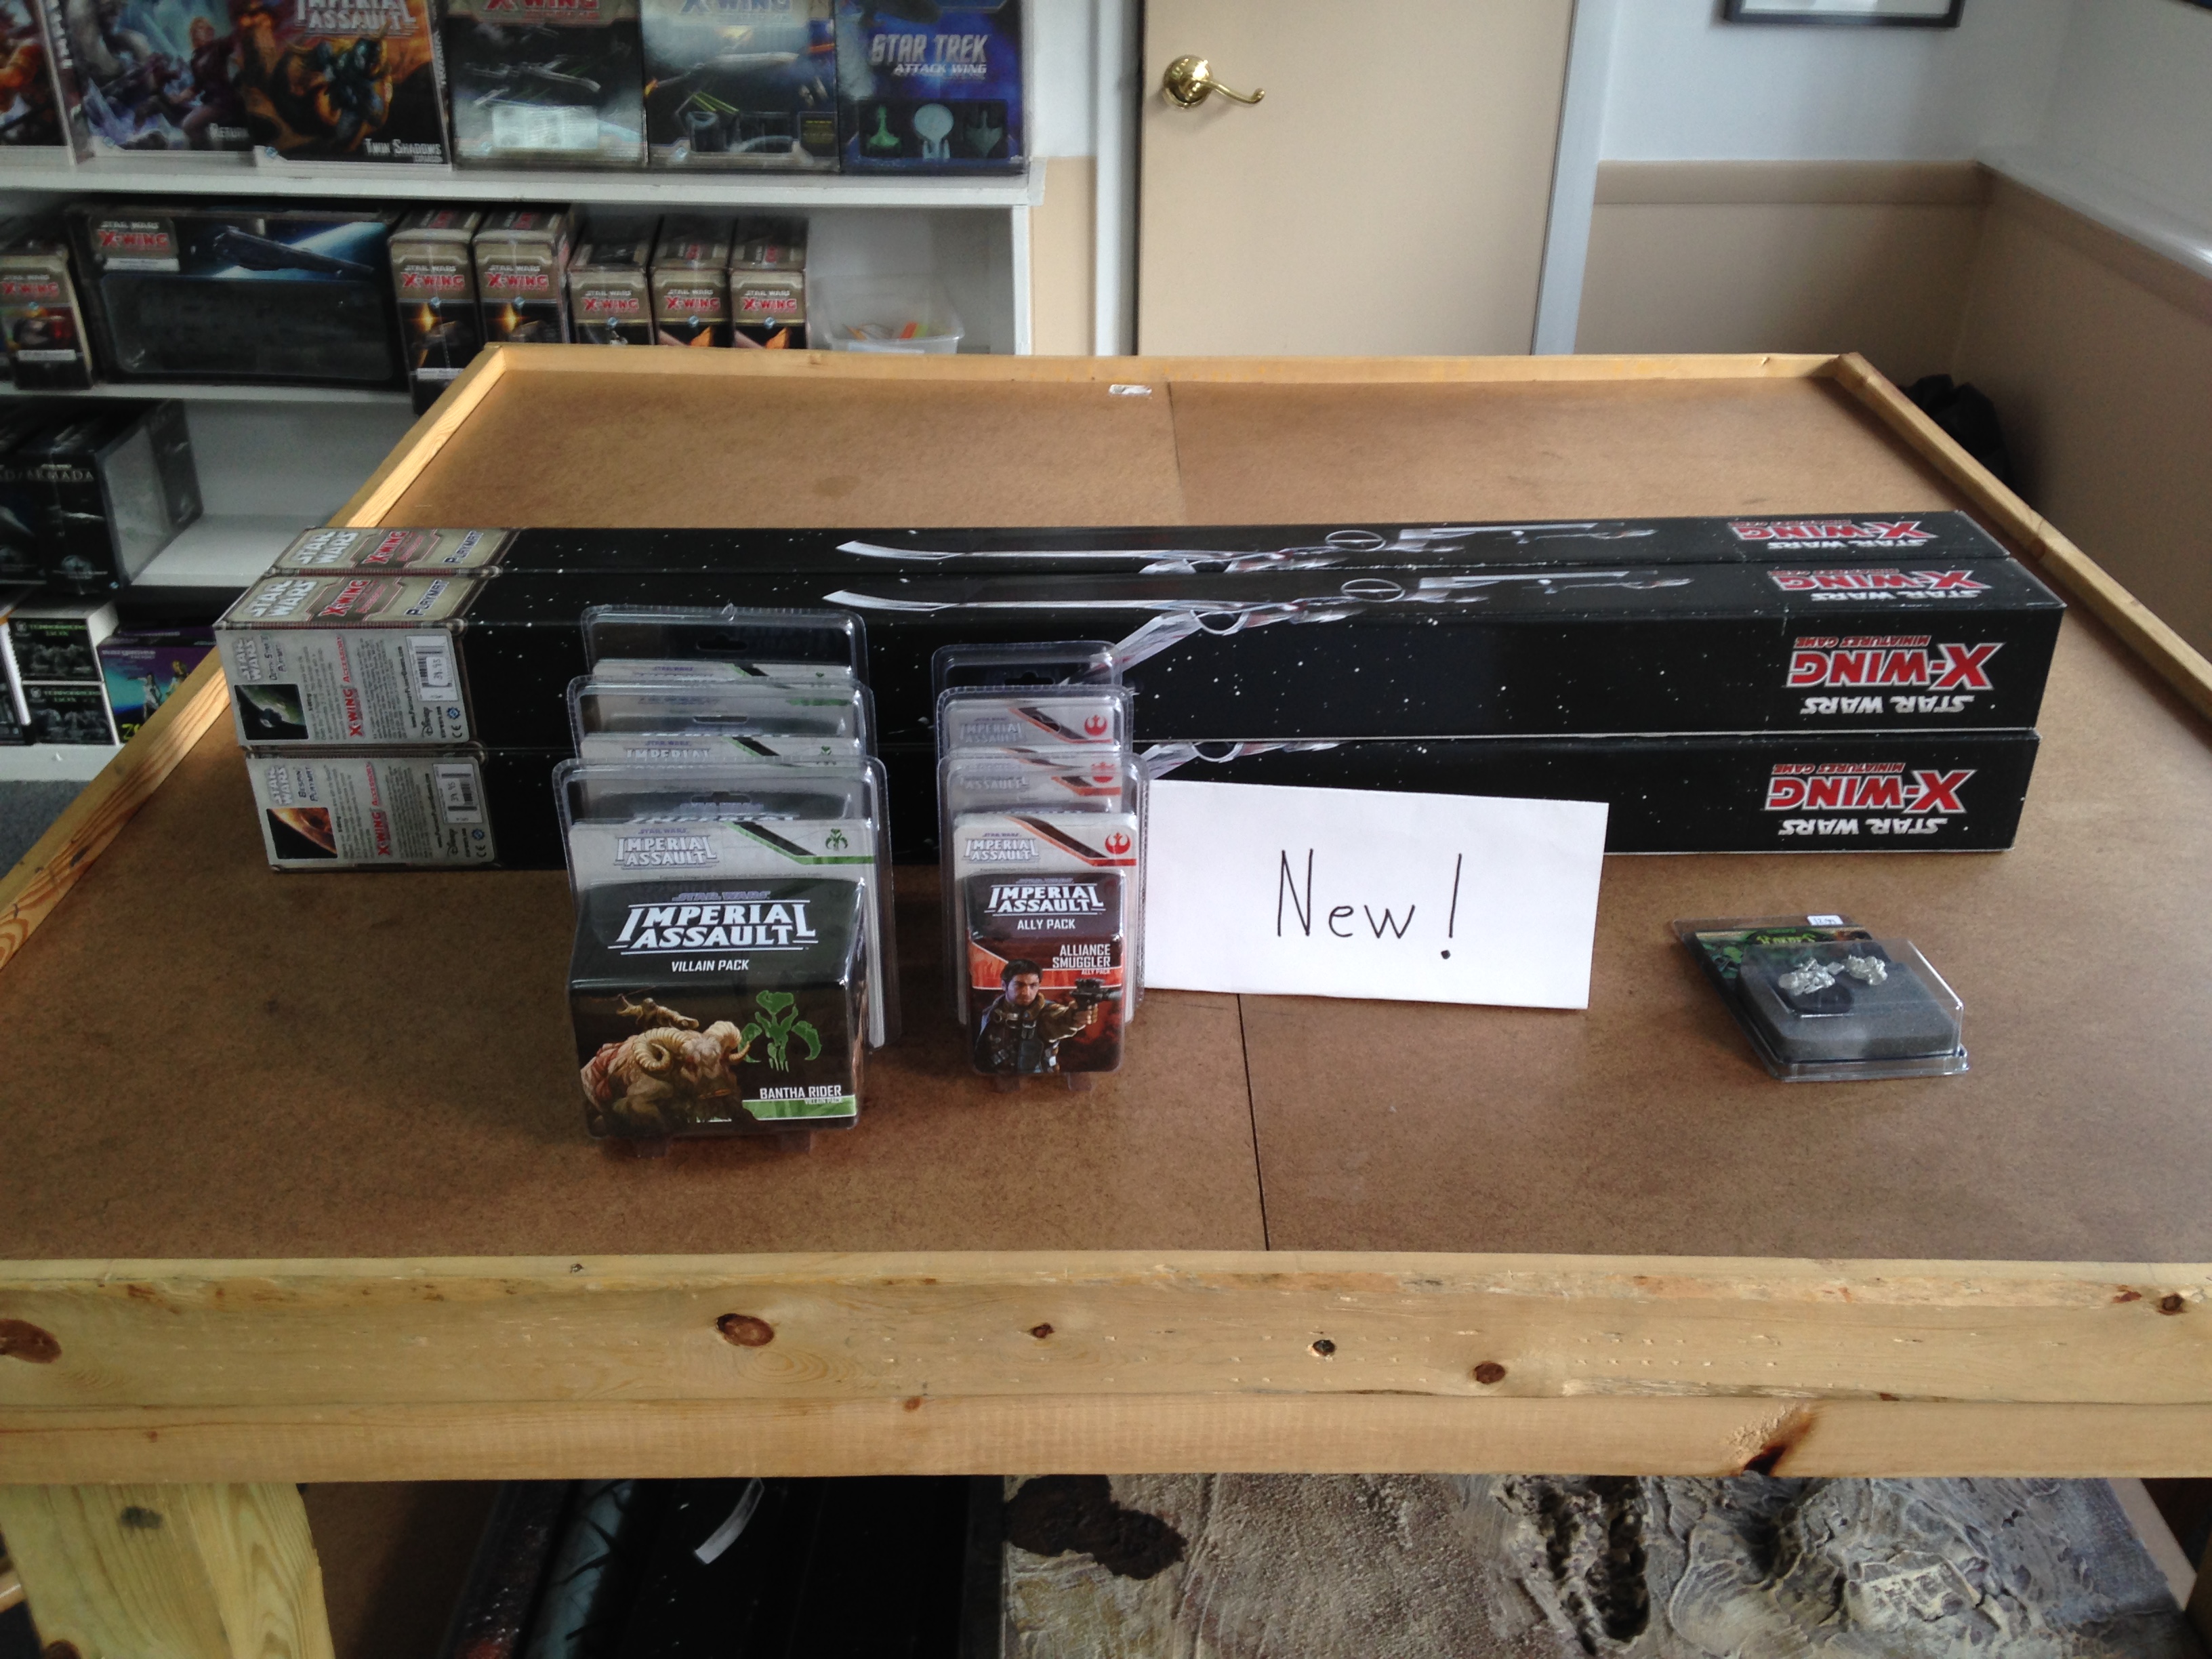 New Imperial Assault Units and Playmats have Arrived! (And much more!)